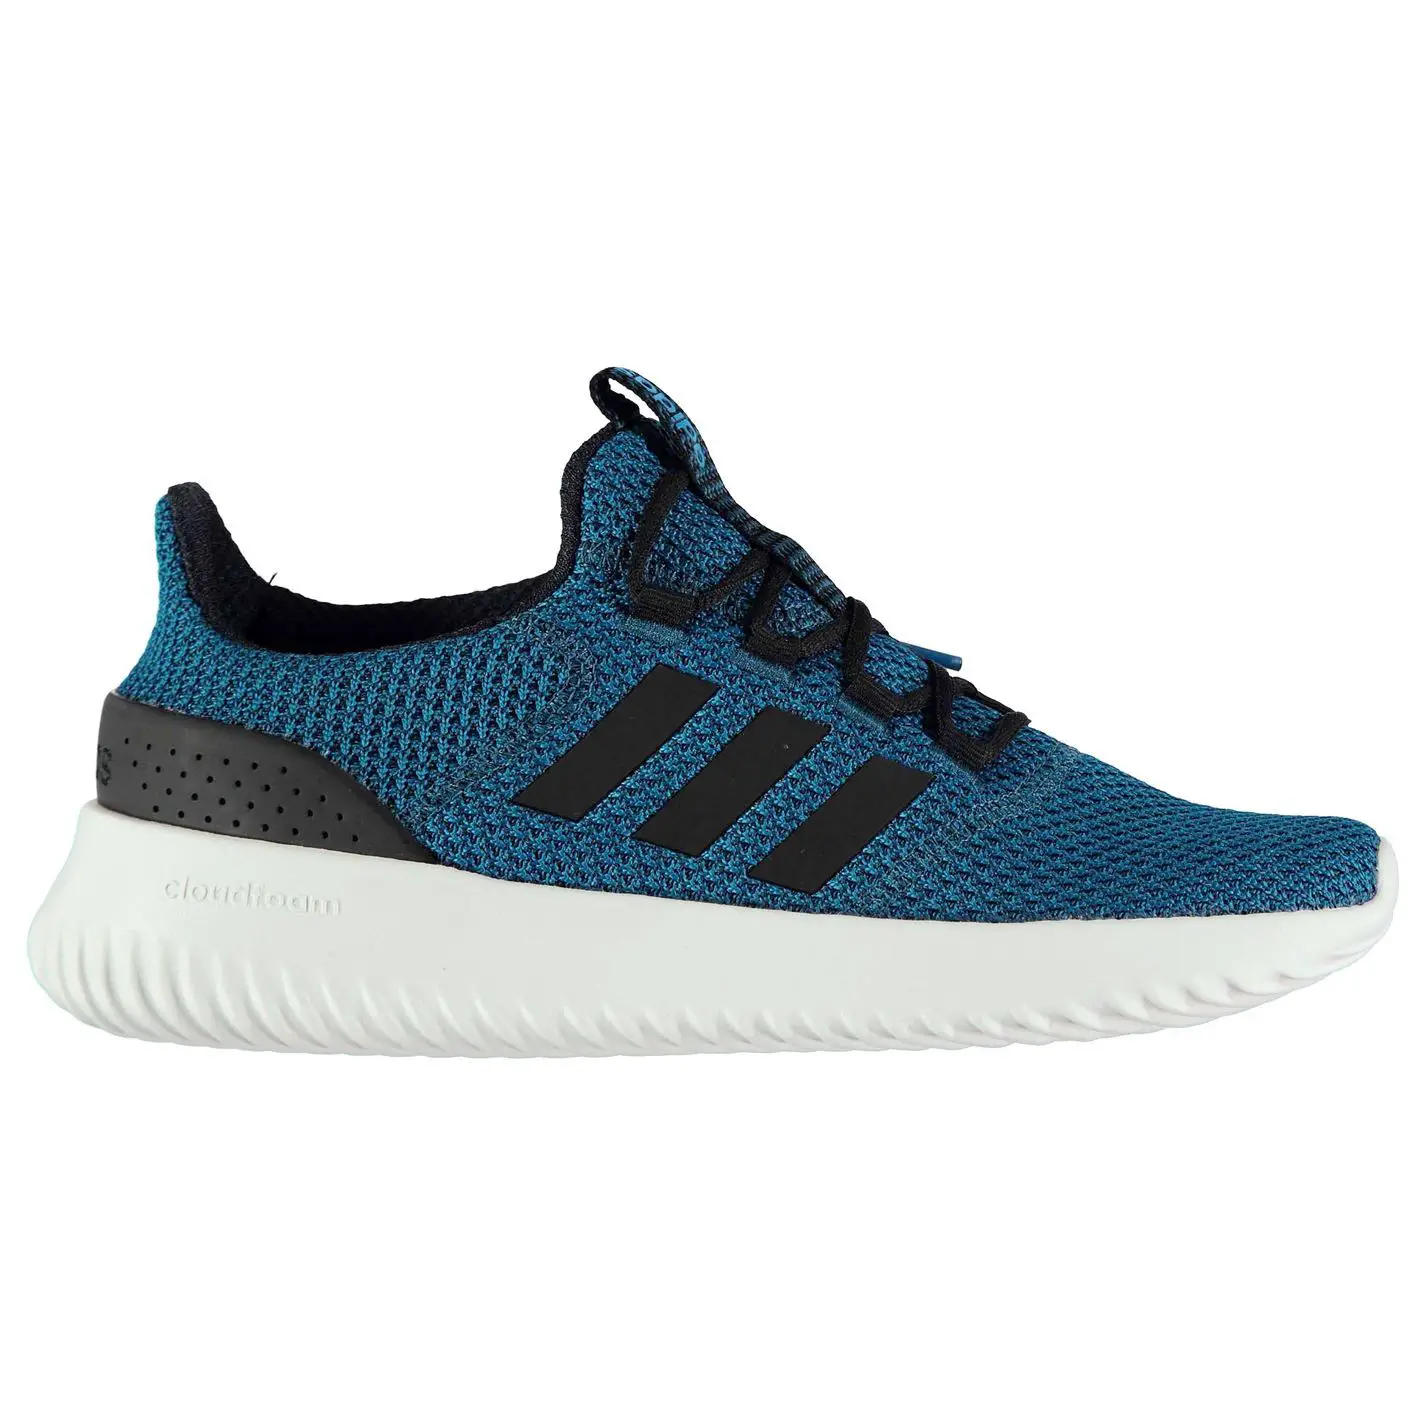 adidas Mens Cloudfoam Ultimate Trainers Shoes Lace Up Lightweight ...